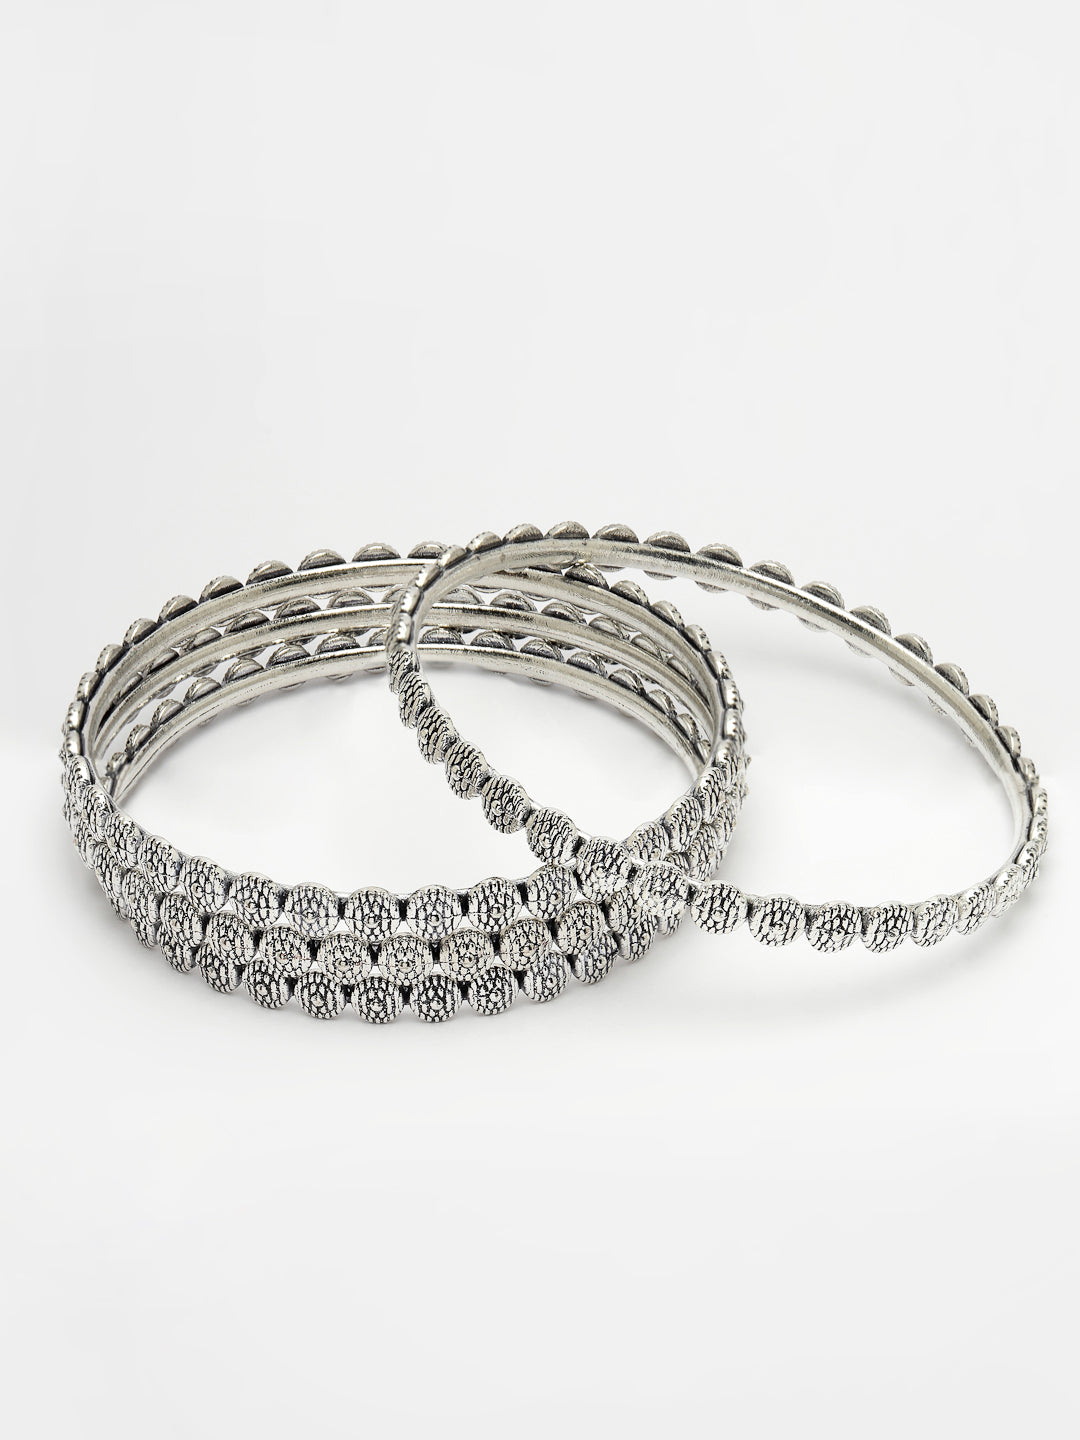 Women's Set Of 4 Silver-Toned German Silver Oxidised Bangles - Nvr